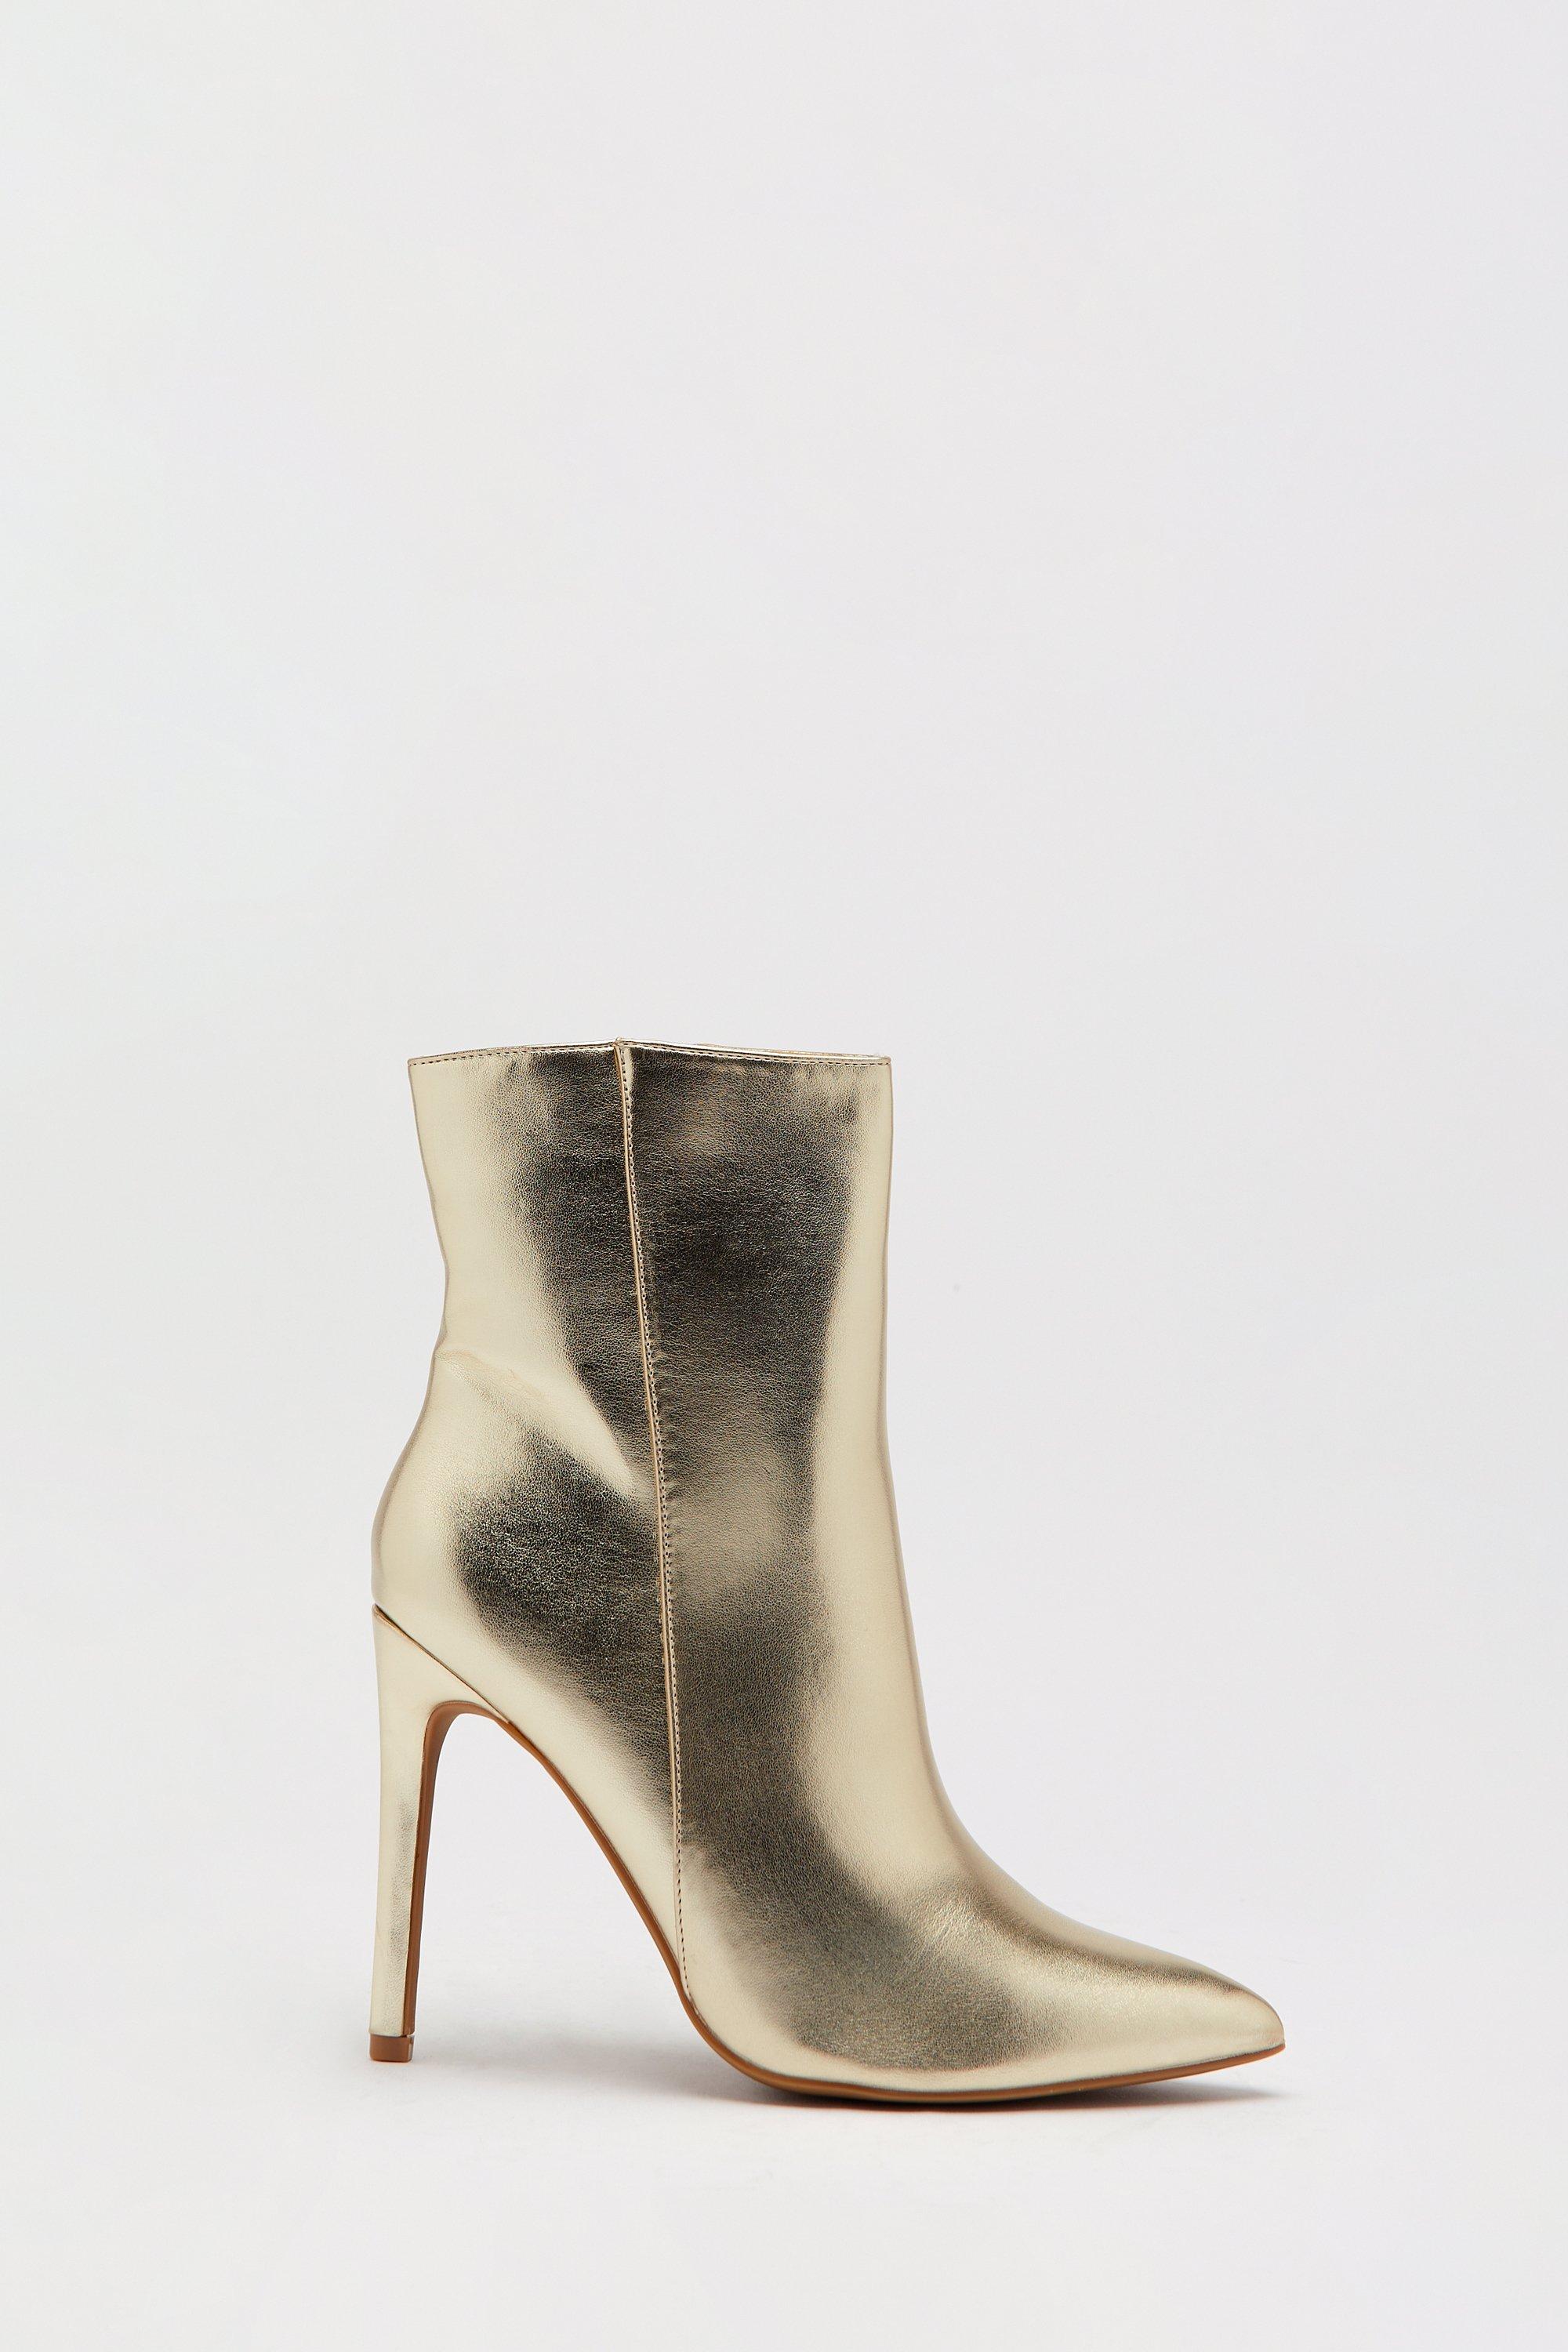 Womens Pointed Toe High Heeled Boot - gold